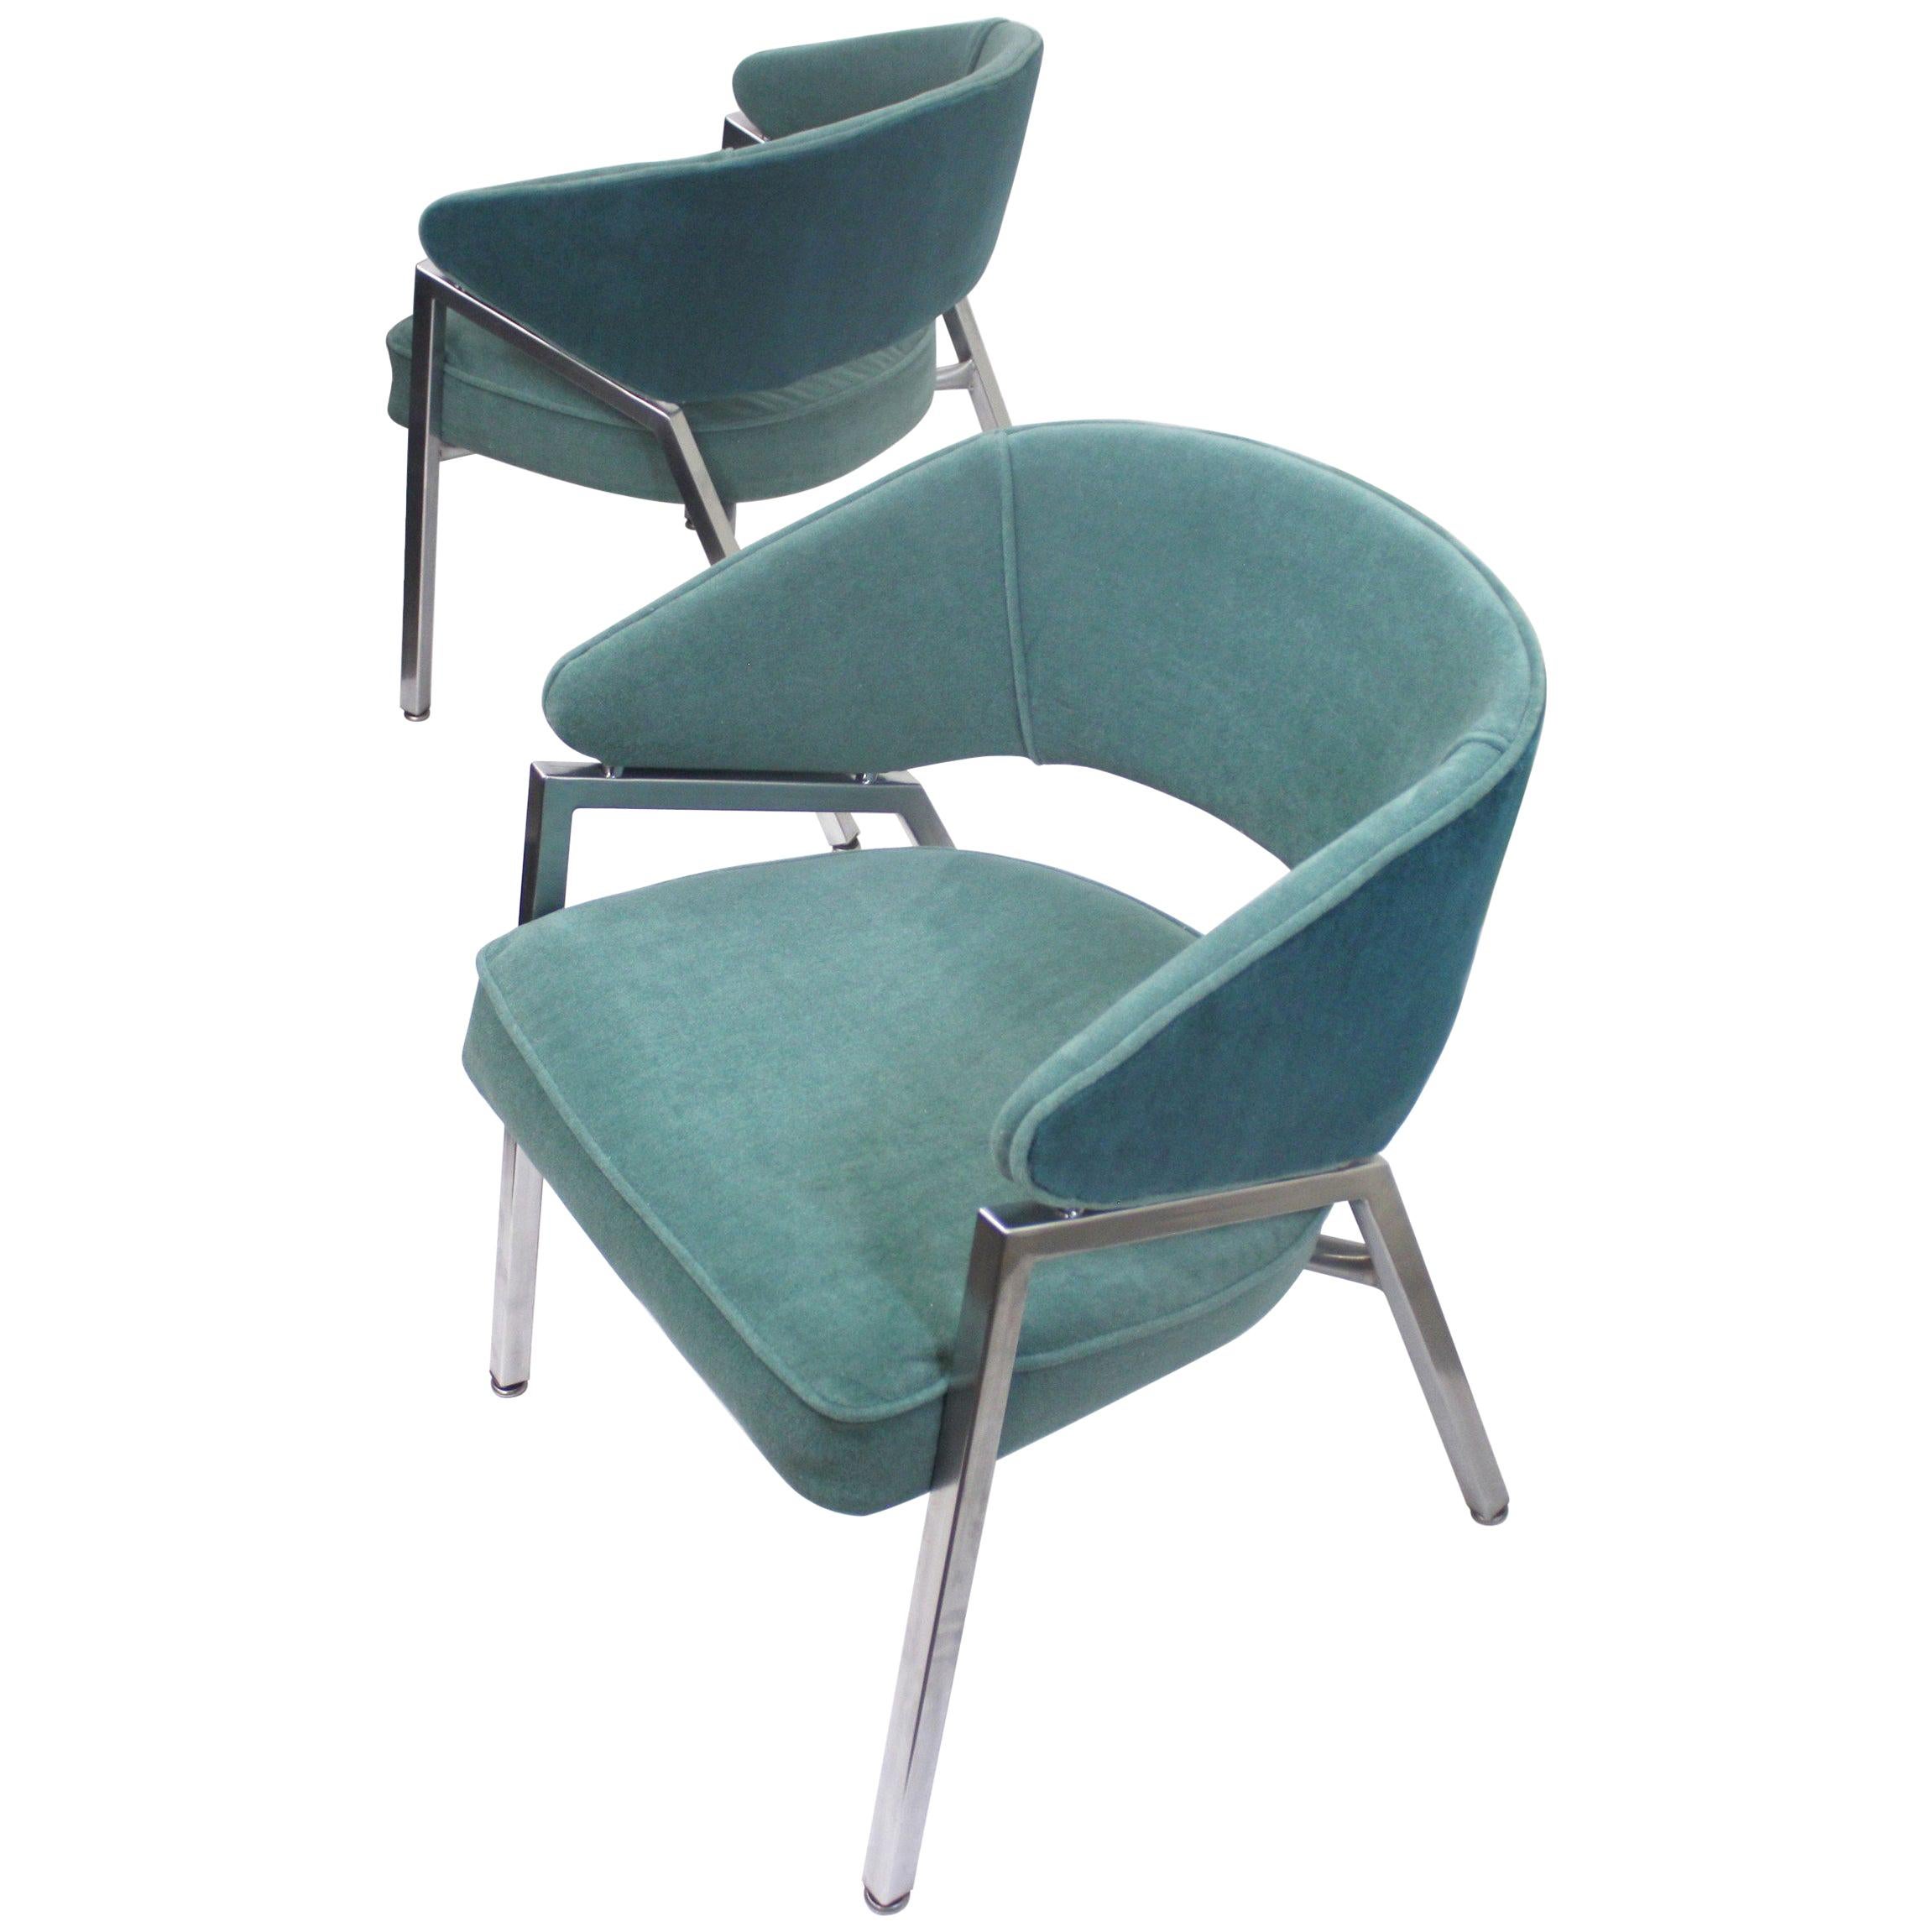 Rare Pair of 1970s Mid-Century Modern Teal Green and Chrome Side Armchairs